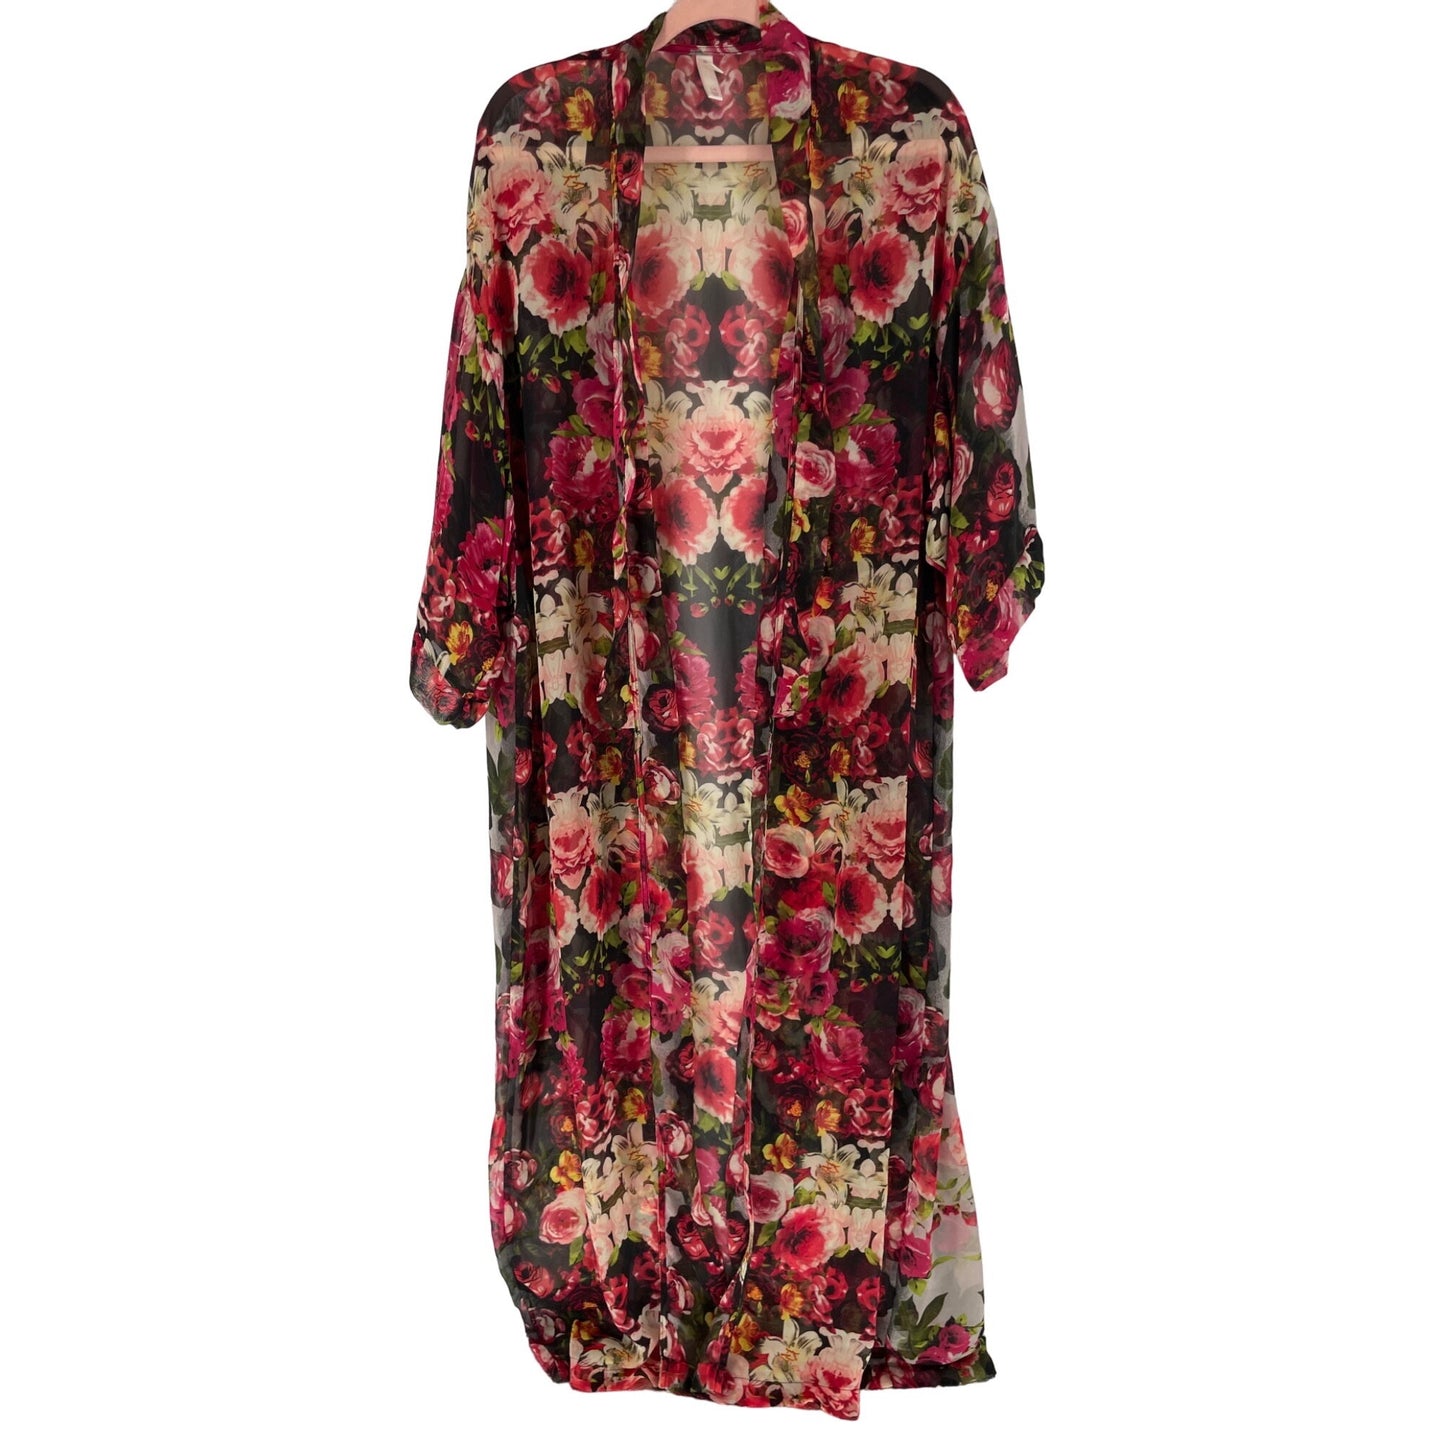 Xhilaration Women's Size Large Multi-Colored Sheer Floral Print Robe